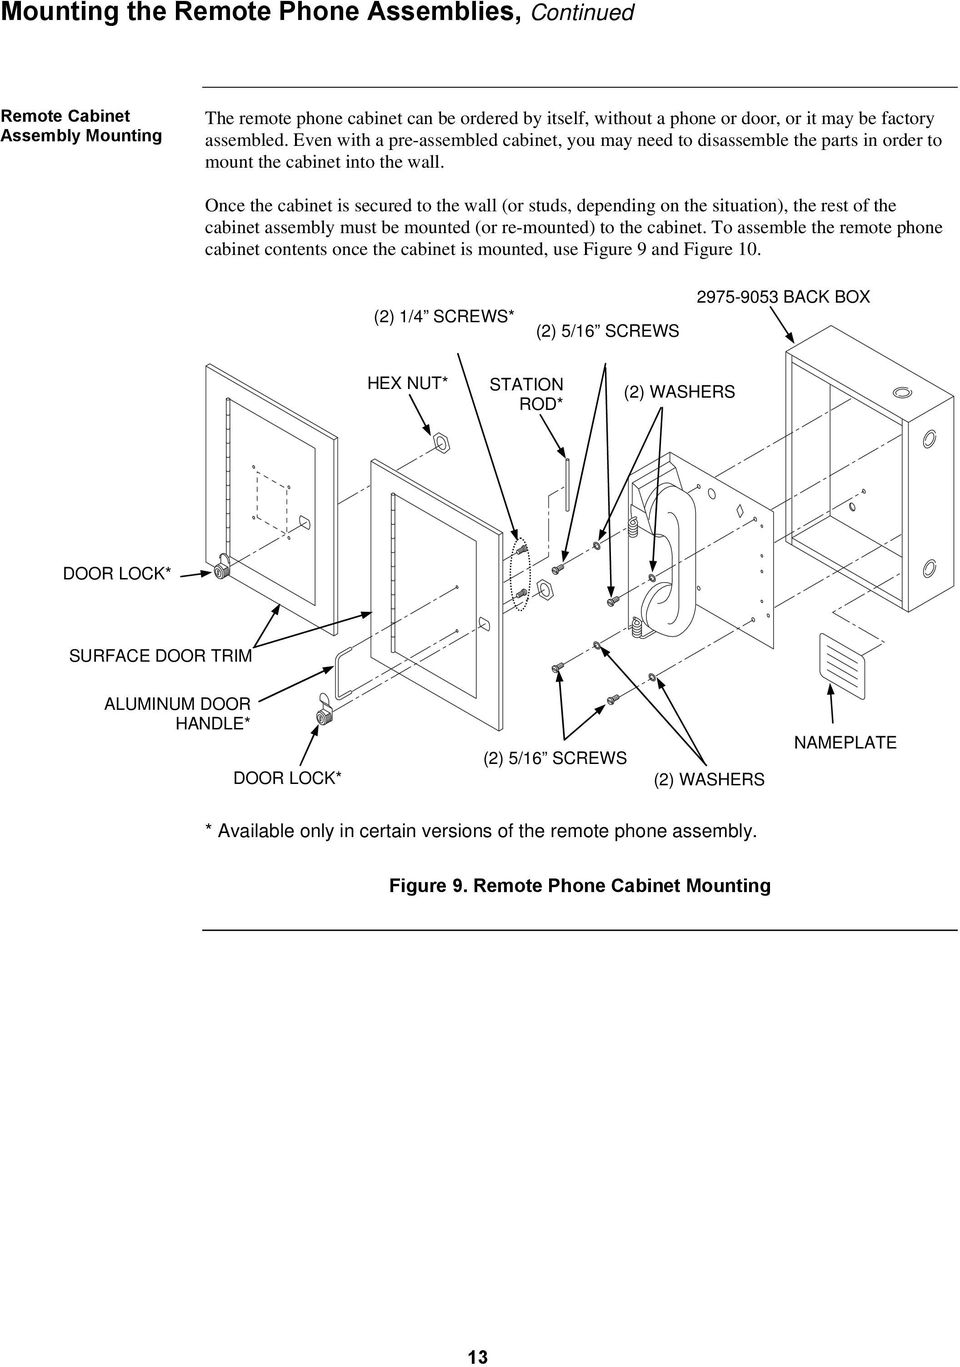 Once the cabinet is secured to the wall (or studs, depending on the situation), the rest of the cabinet assembly must be mounted (or re-mounted) to the cabinet.